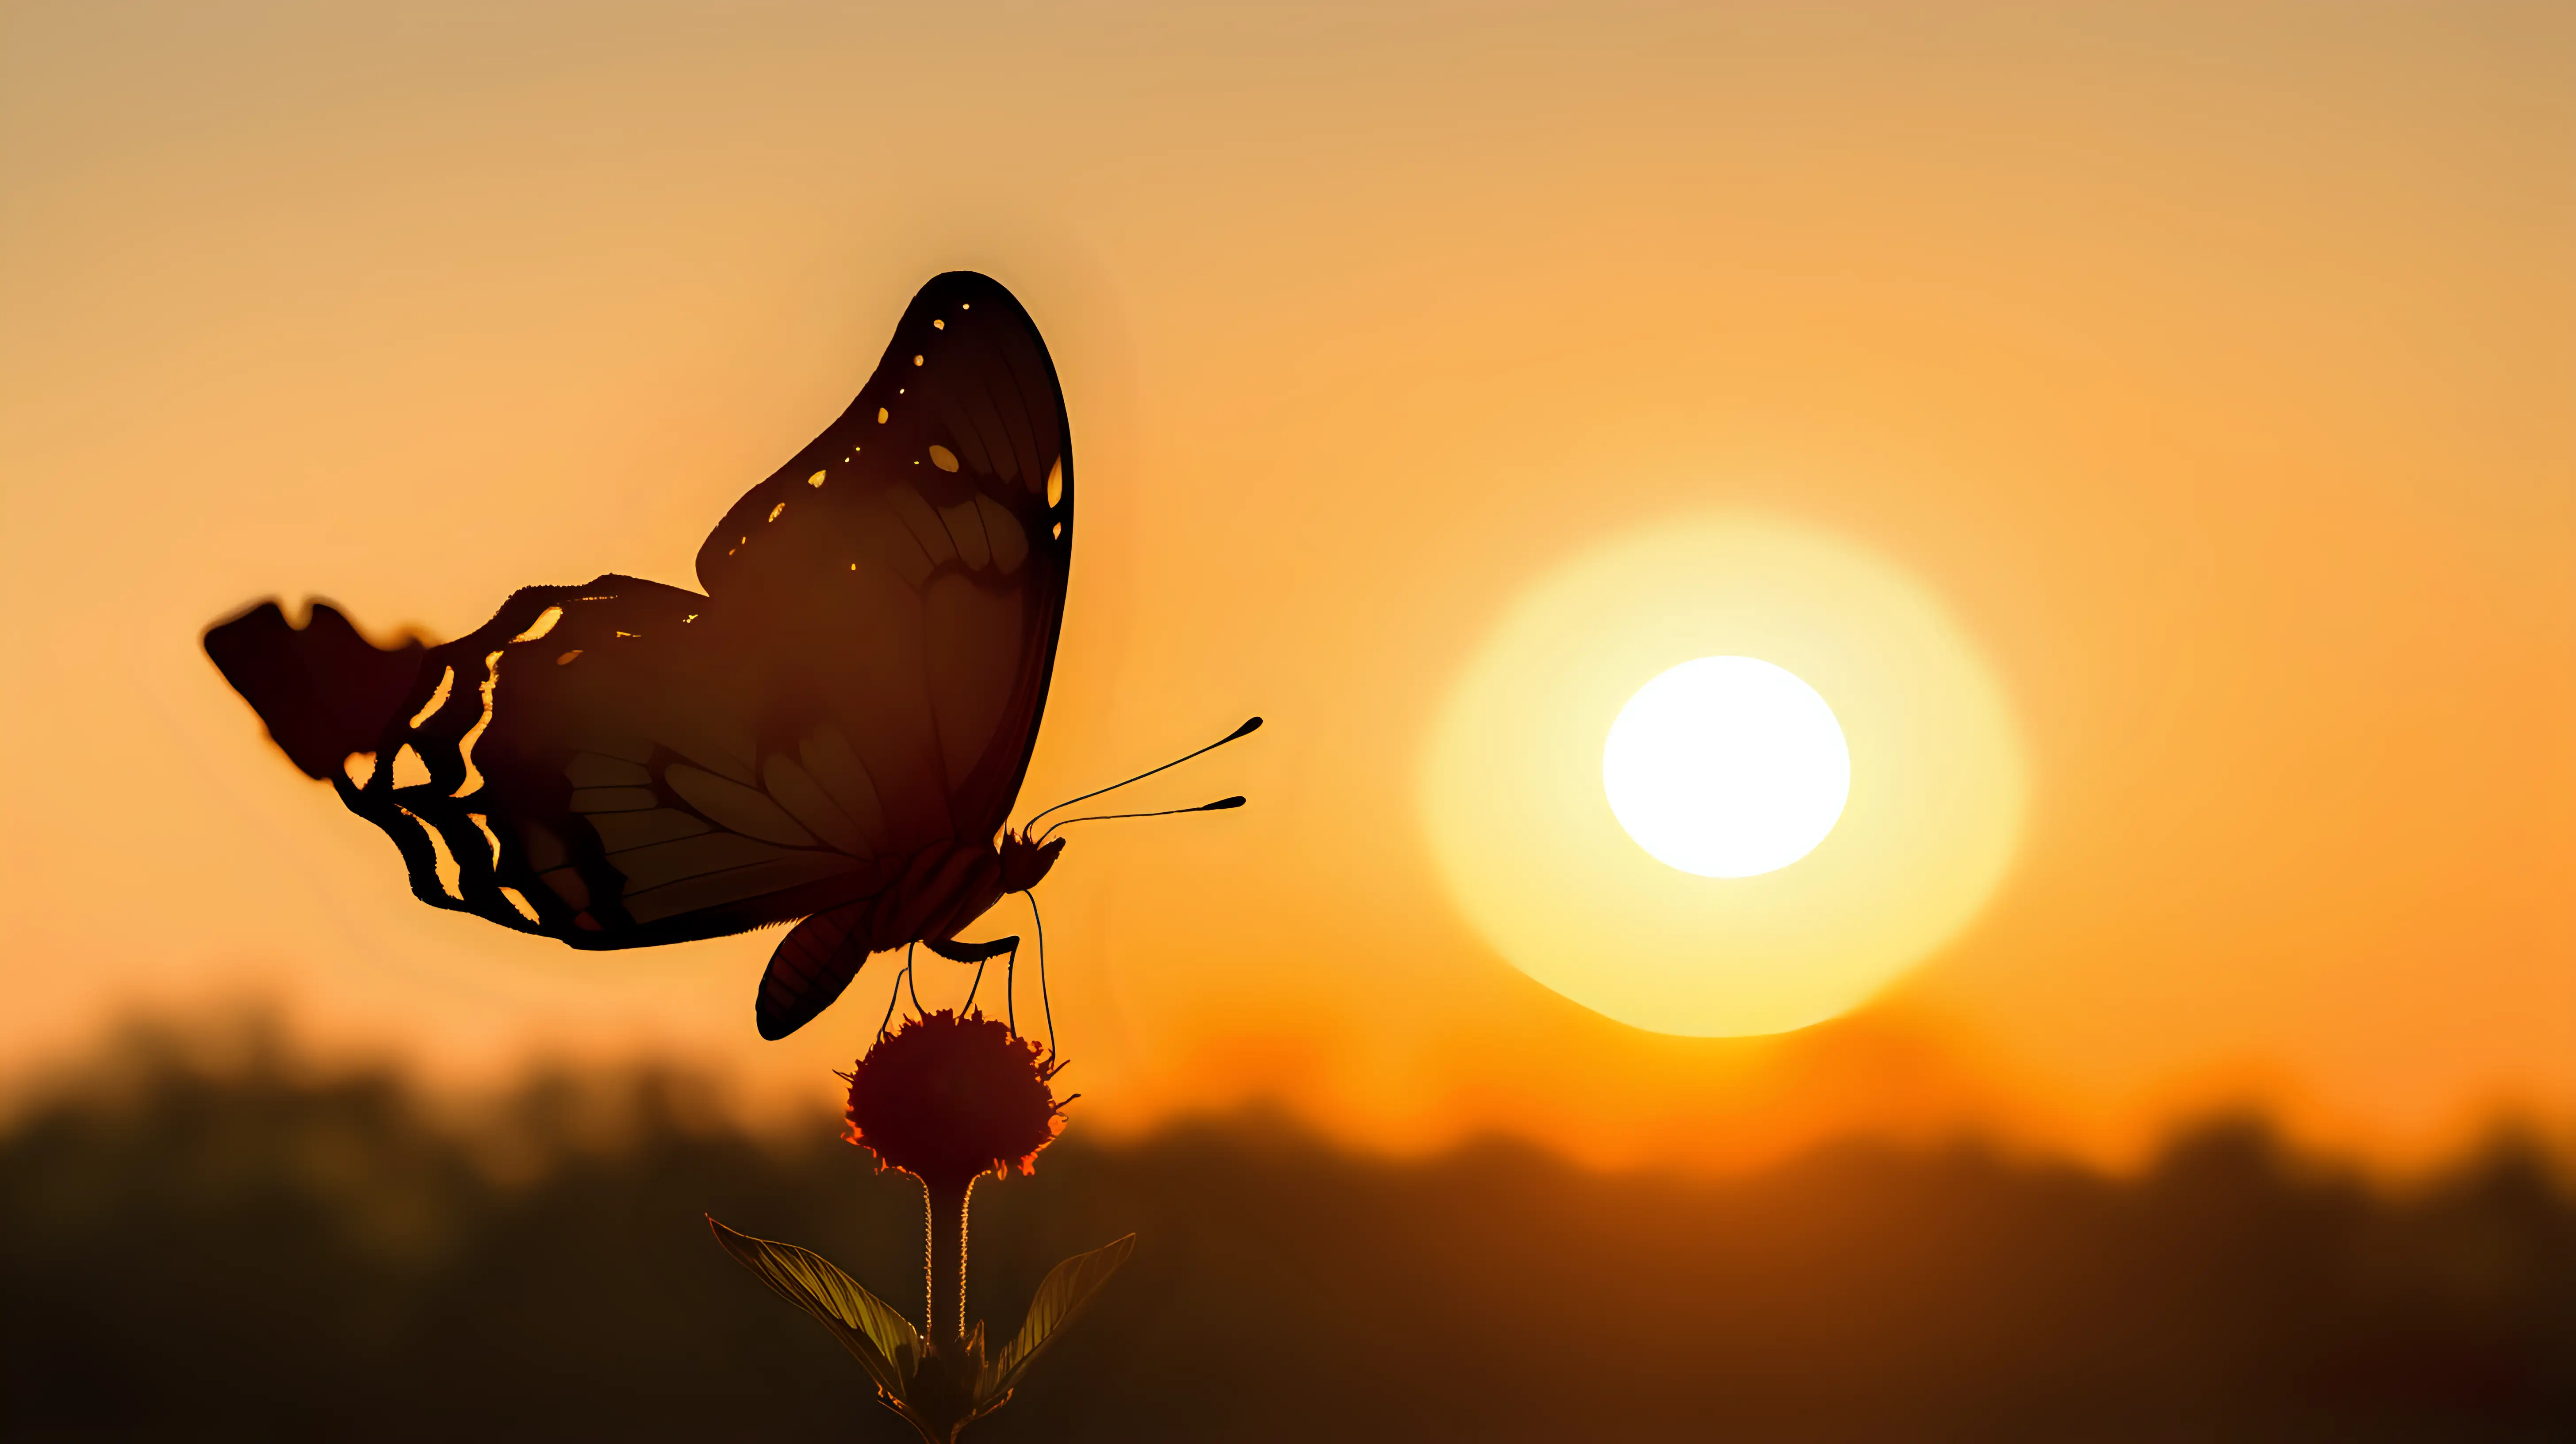 Tranquil Sunset Silhouette Butterfly in Golden Hour Light